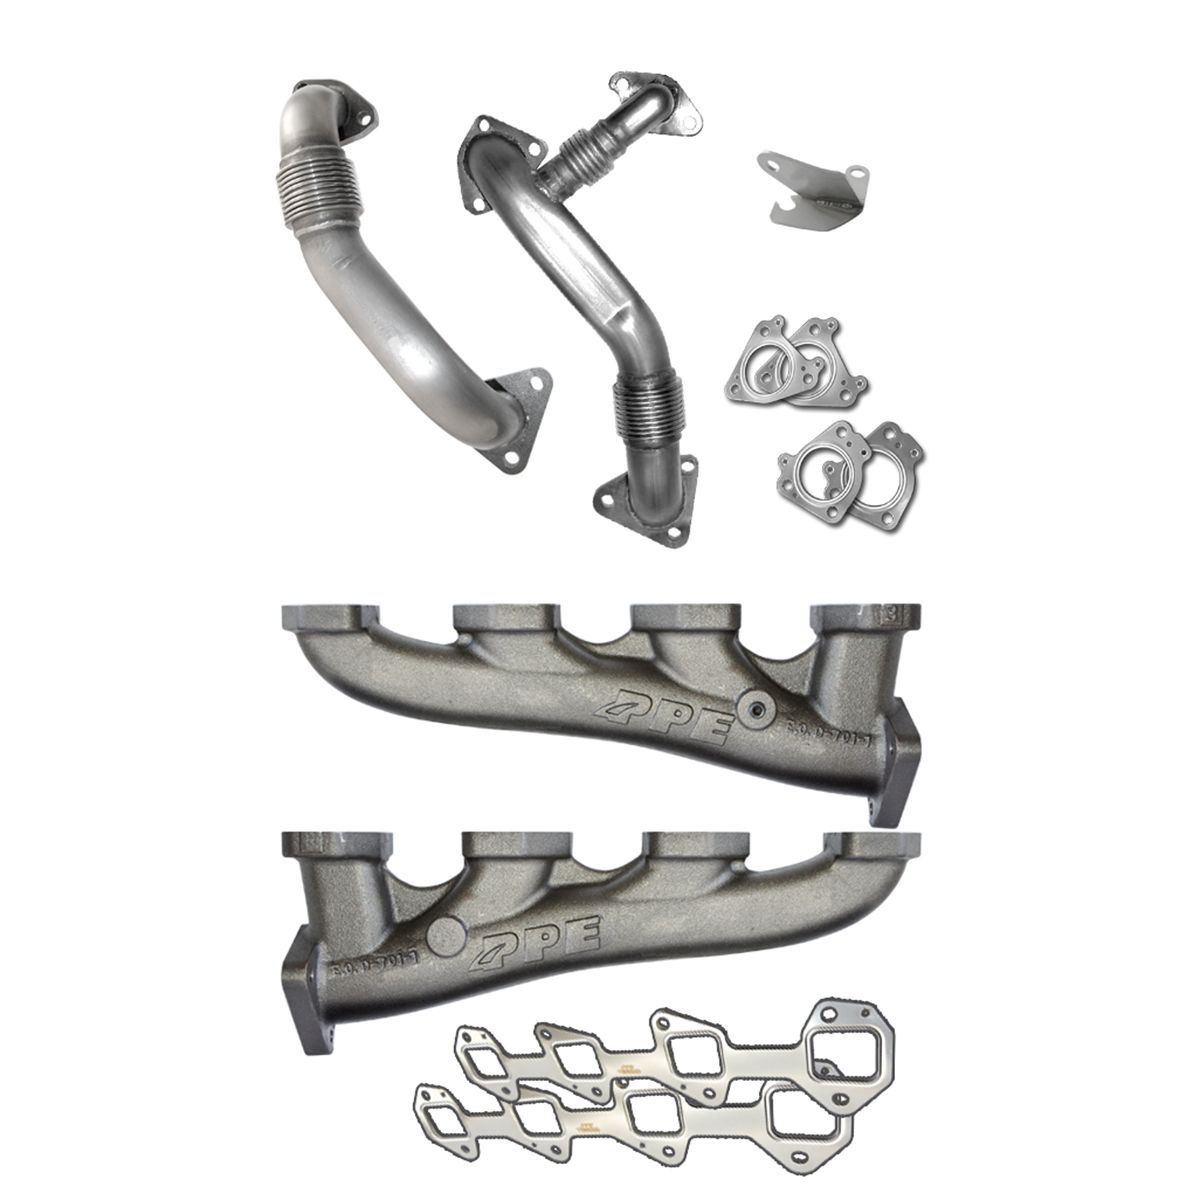 PPE - PPE High Flow Exhaust Manifolds & Up Pipes For 02-04 LB7 Duramax (CA Emissions)